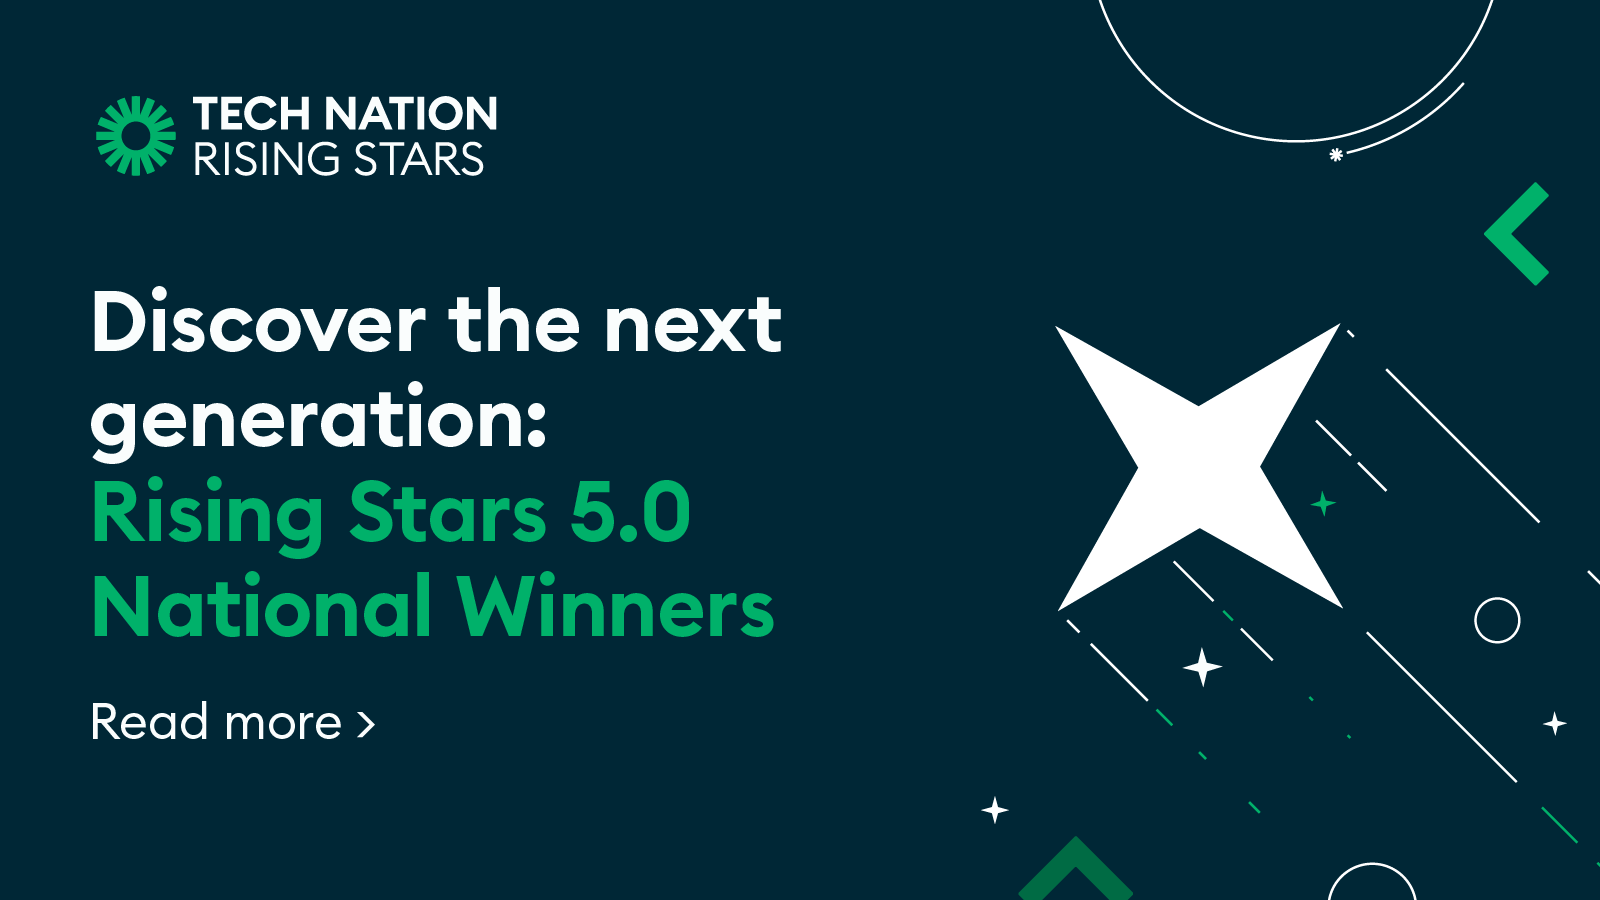 The best early stage tech startups from across the UK revealed in Tech Nation’s final Rising Stars competition